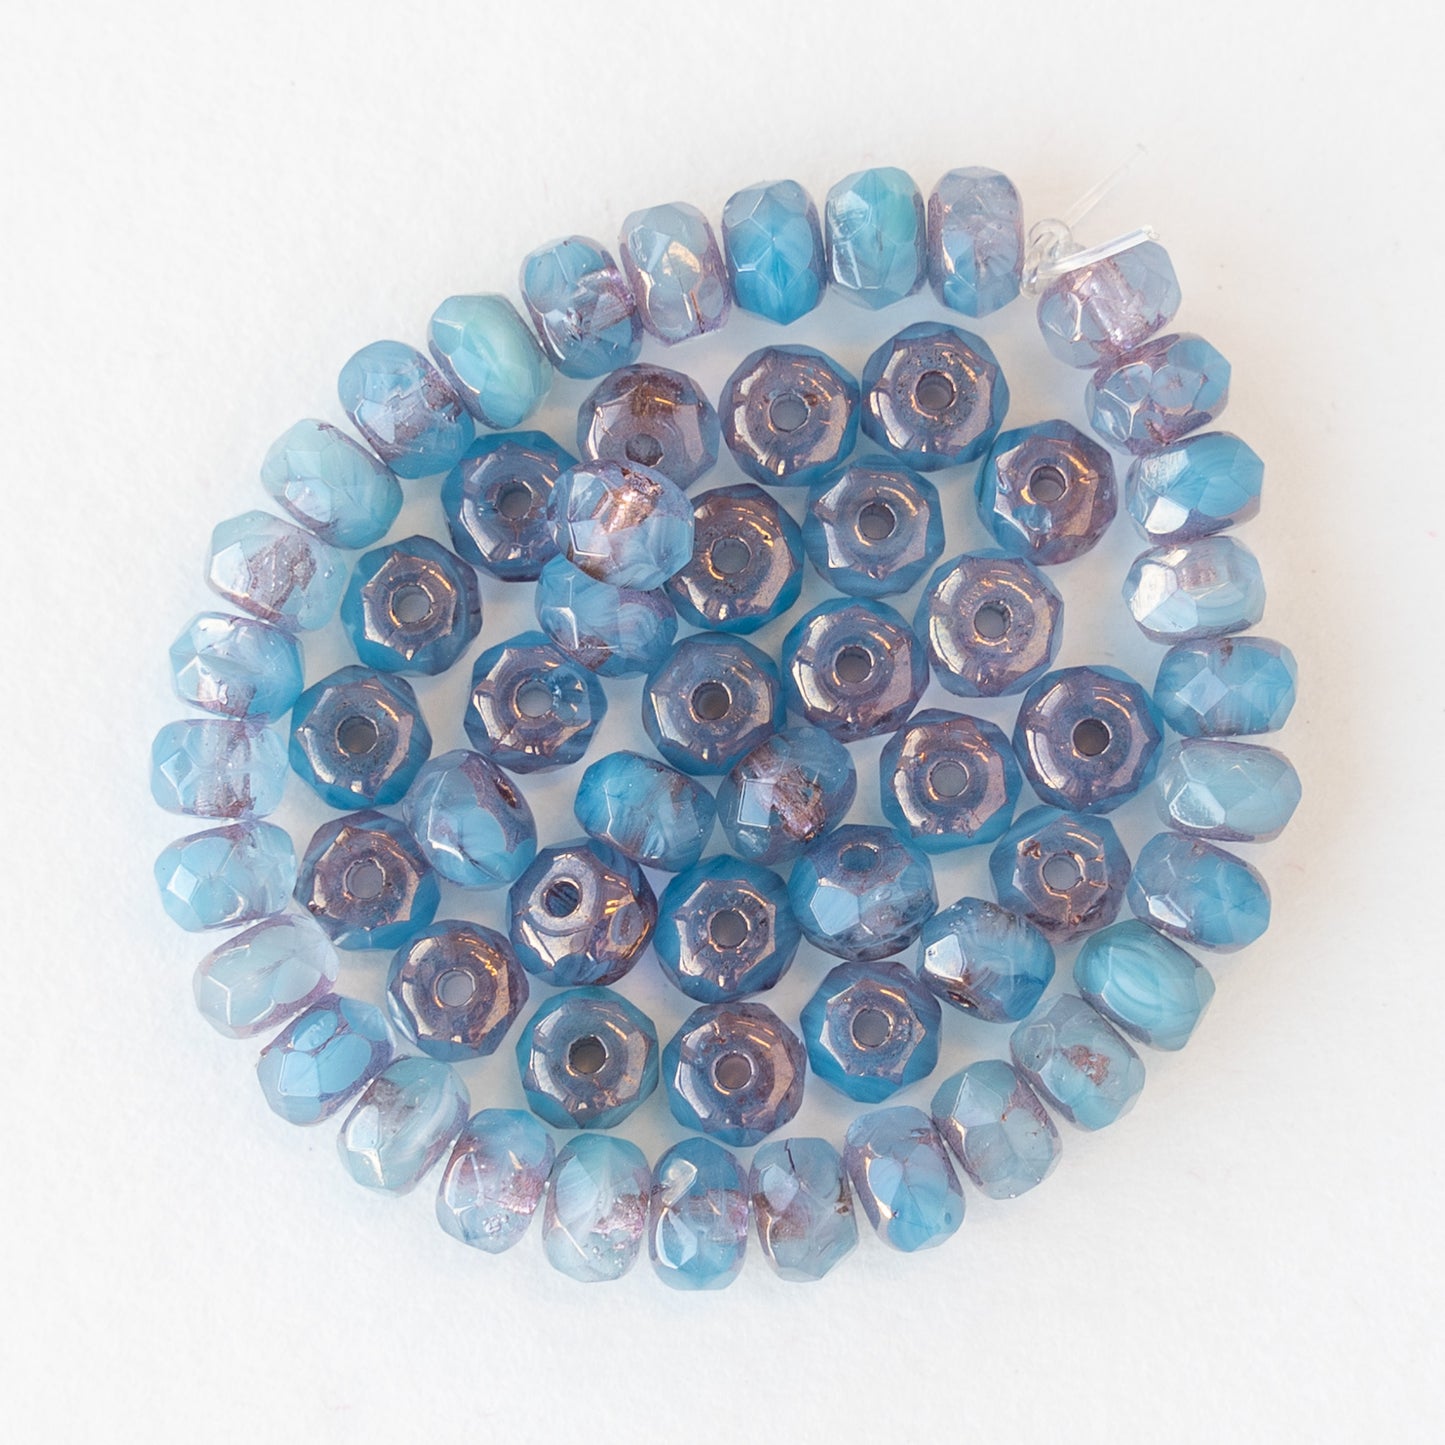 3x5mm Rondelle Beads - Blue Pink with Bronze Wash - 30 Beads